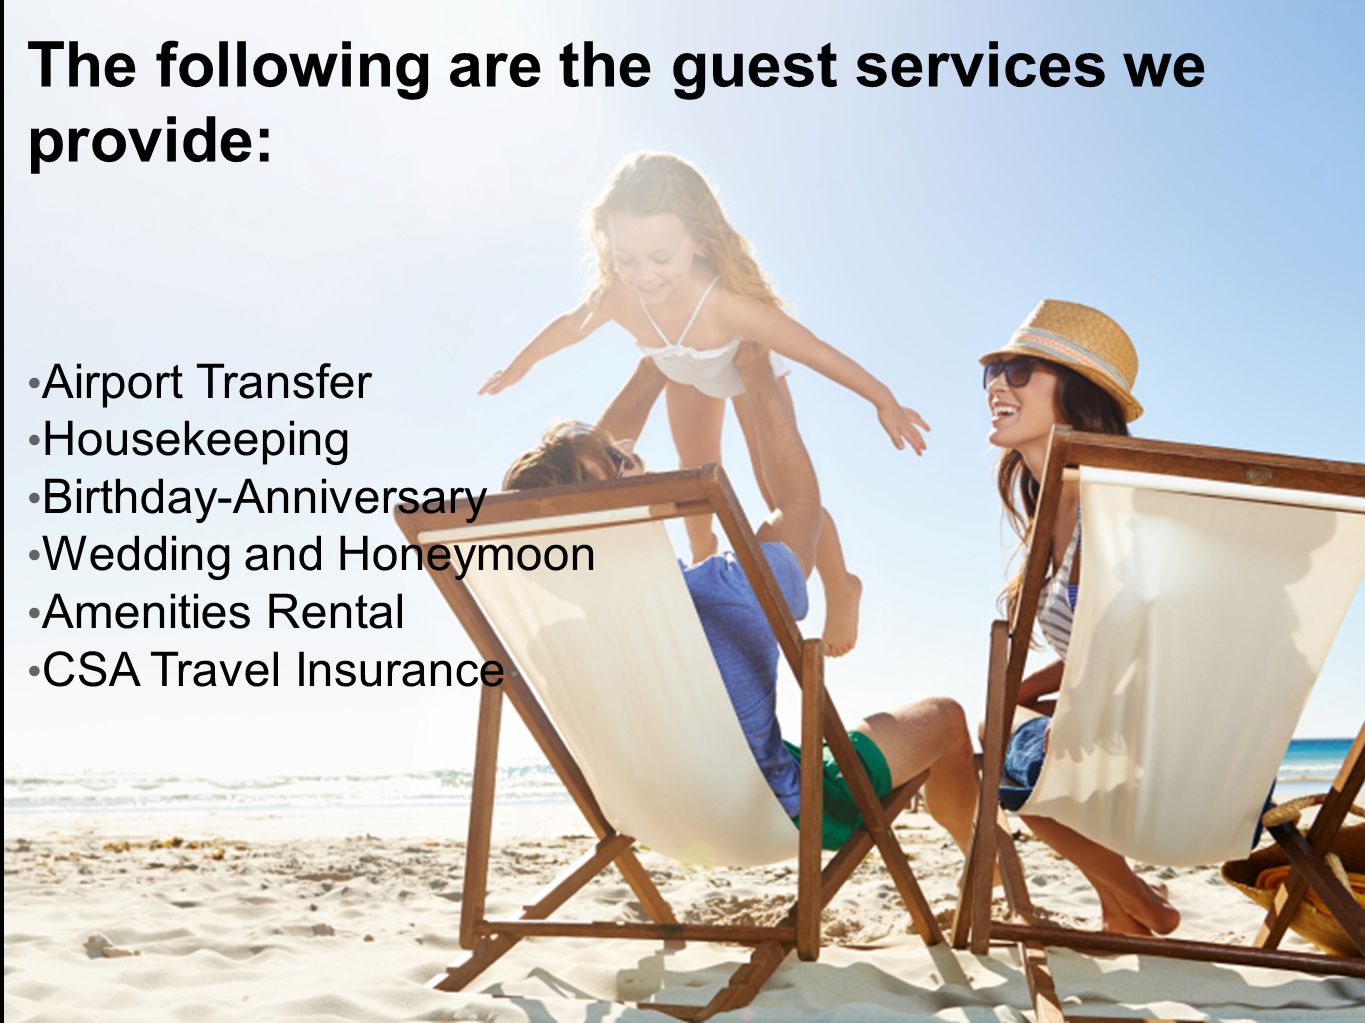 The following are the guest services we provide: Airport Transfer Housekeeping Birthday-Anniversary Wedding and Honeymoon Amenities Rental CSA Travel Insurance